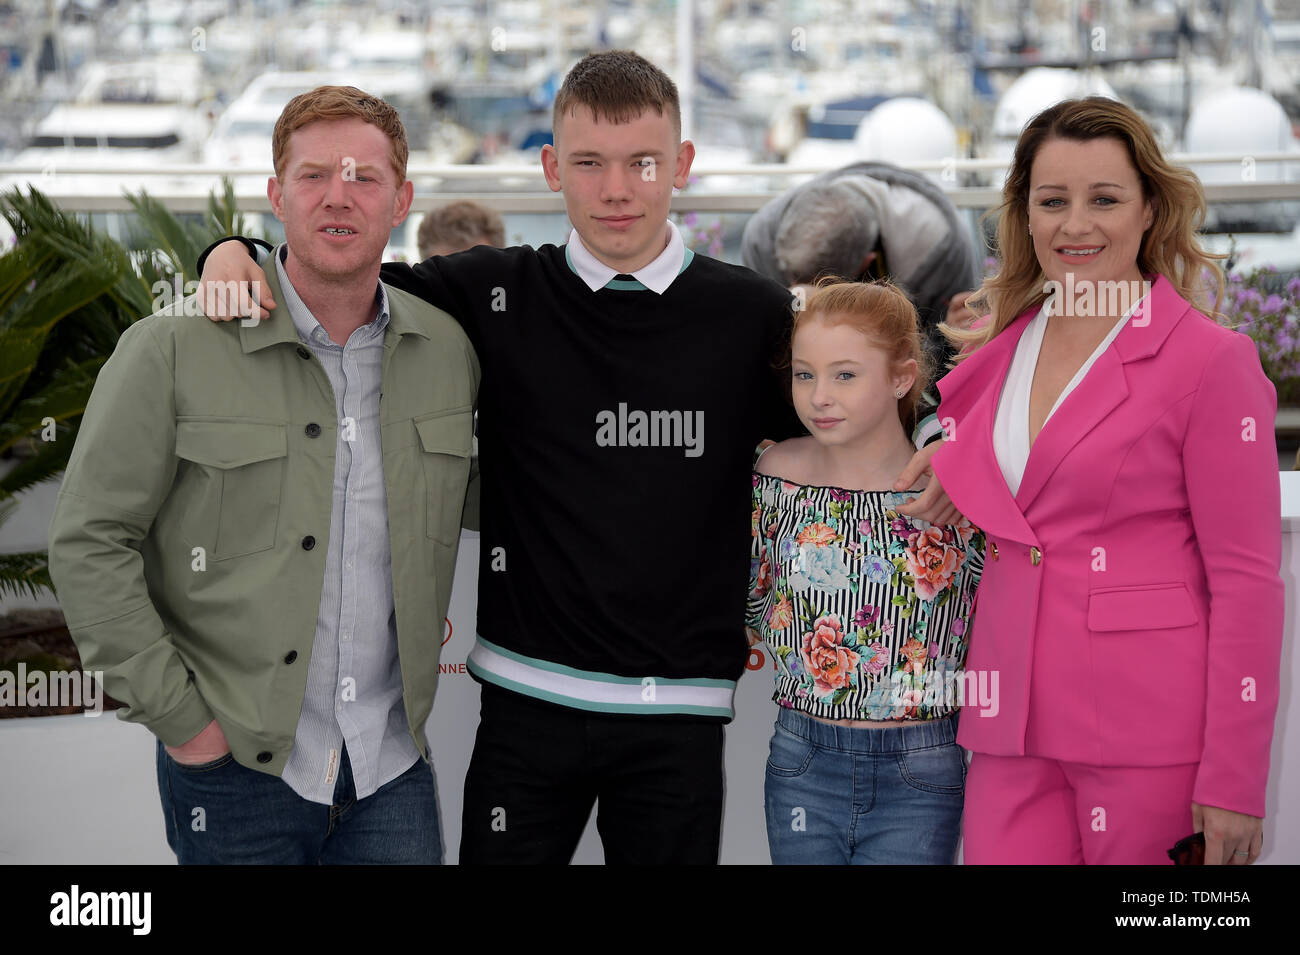 72nd Cannes Film Festival 2019, Photocall film : Sorry, we missed you Pictured: Kris Hitchen, Debbie Honeywood, Rhys Stone, Katie Proctor  Where: Cannes, France When: 17 May 2019 Credit: IPA/WENN.com  **Only available for publication in UK, USA, Germany, Austria, Switzerland** Stock Photo